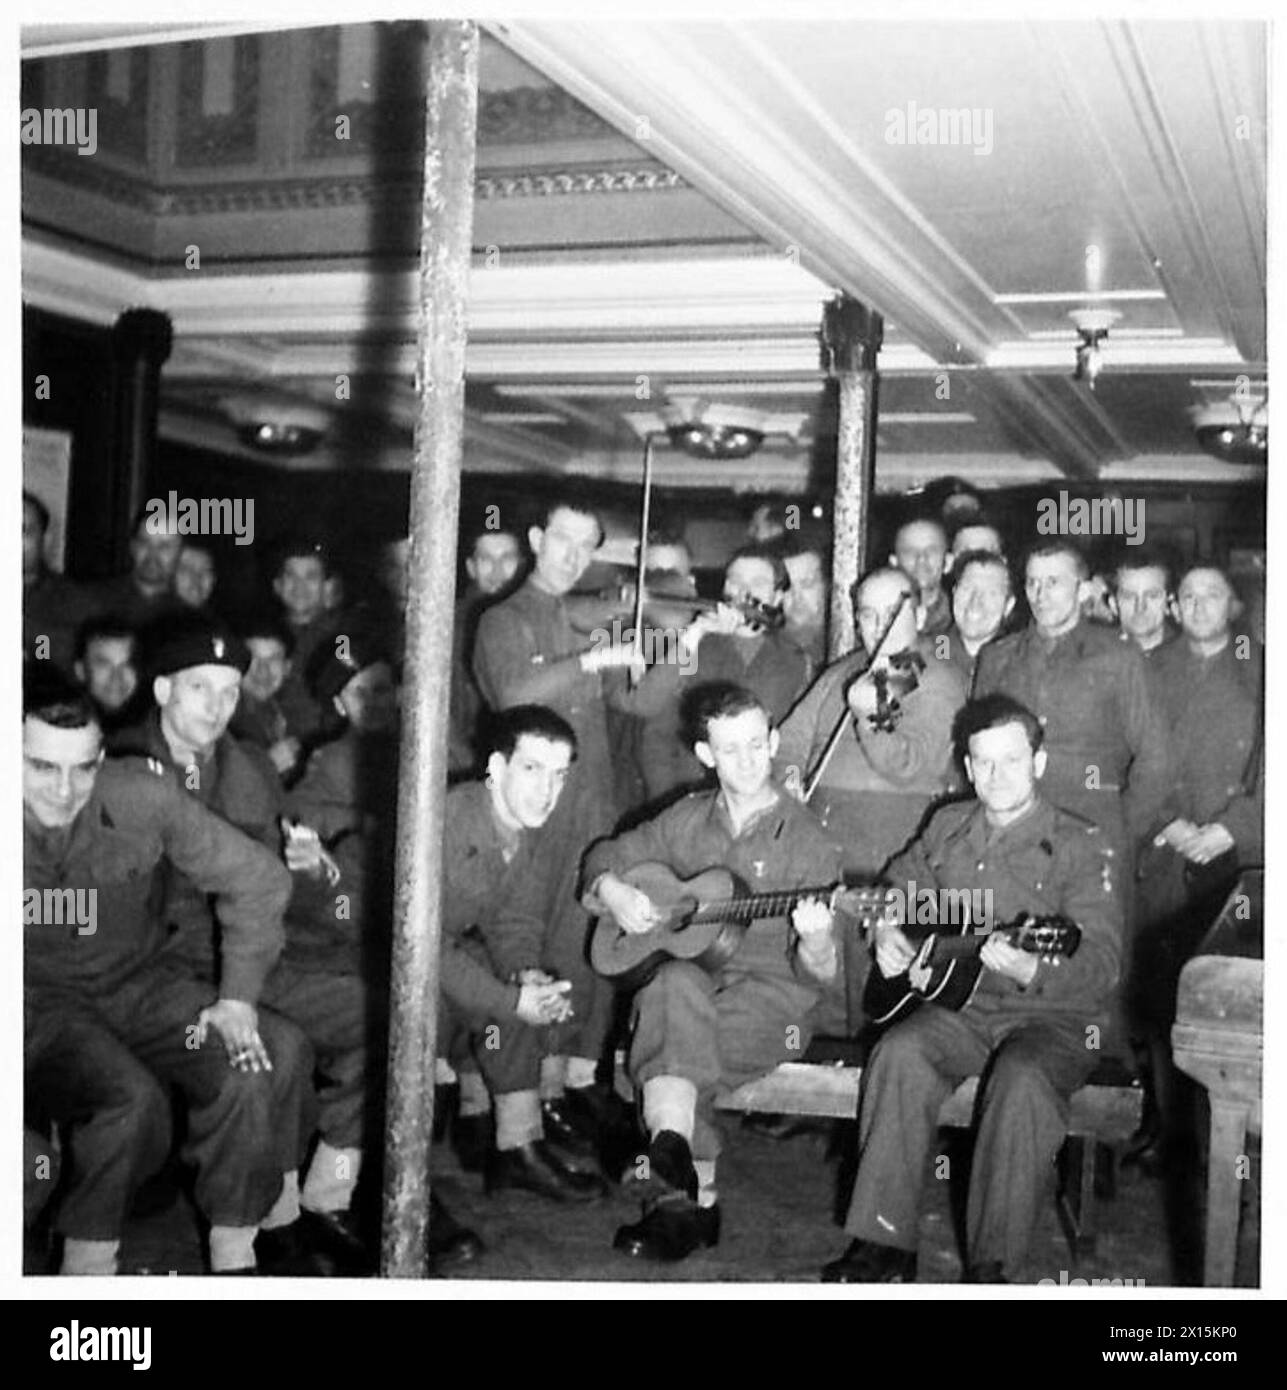 REPATRIATION OF POLISH TROOPS FROM BRITAIN TO POLAND, 1945-1948 - The first contingent of Polish troops who voluntarily decided to return to Poland after the war, amusing themselves with violins and a guitar below decks of SS Banfora at Tilbury. Many of them would face prosecution at the hands of communist regime for serving alongside the Western Allies. Black and white , Polish Army, Royal Navy, SS Banfora Stock Photo